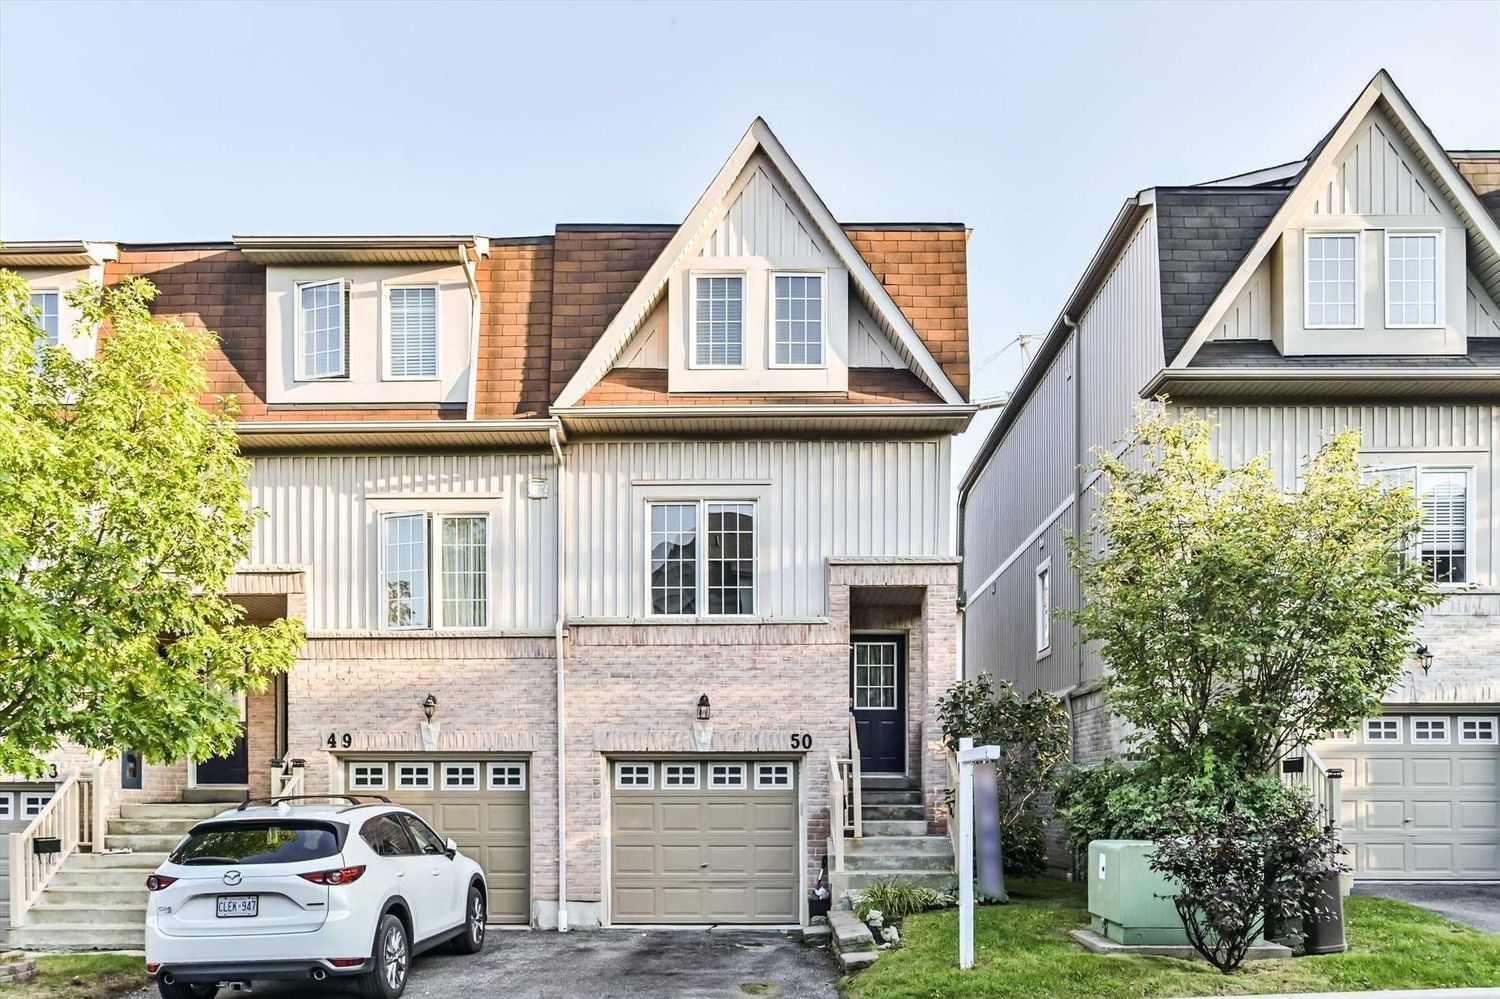 735 Sheppard Avenue. Strathmore Townhomes is located in  Pickering, Toronto - image #1 of 2